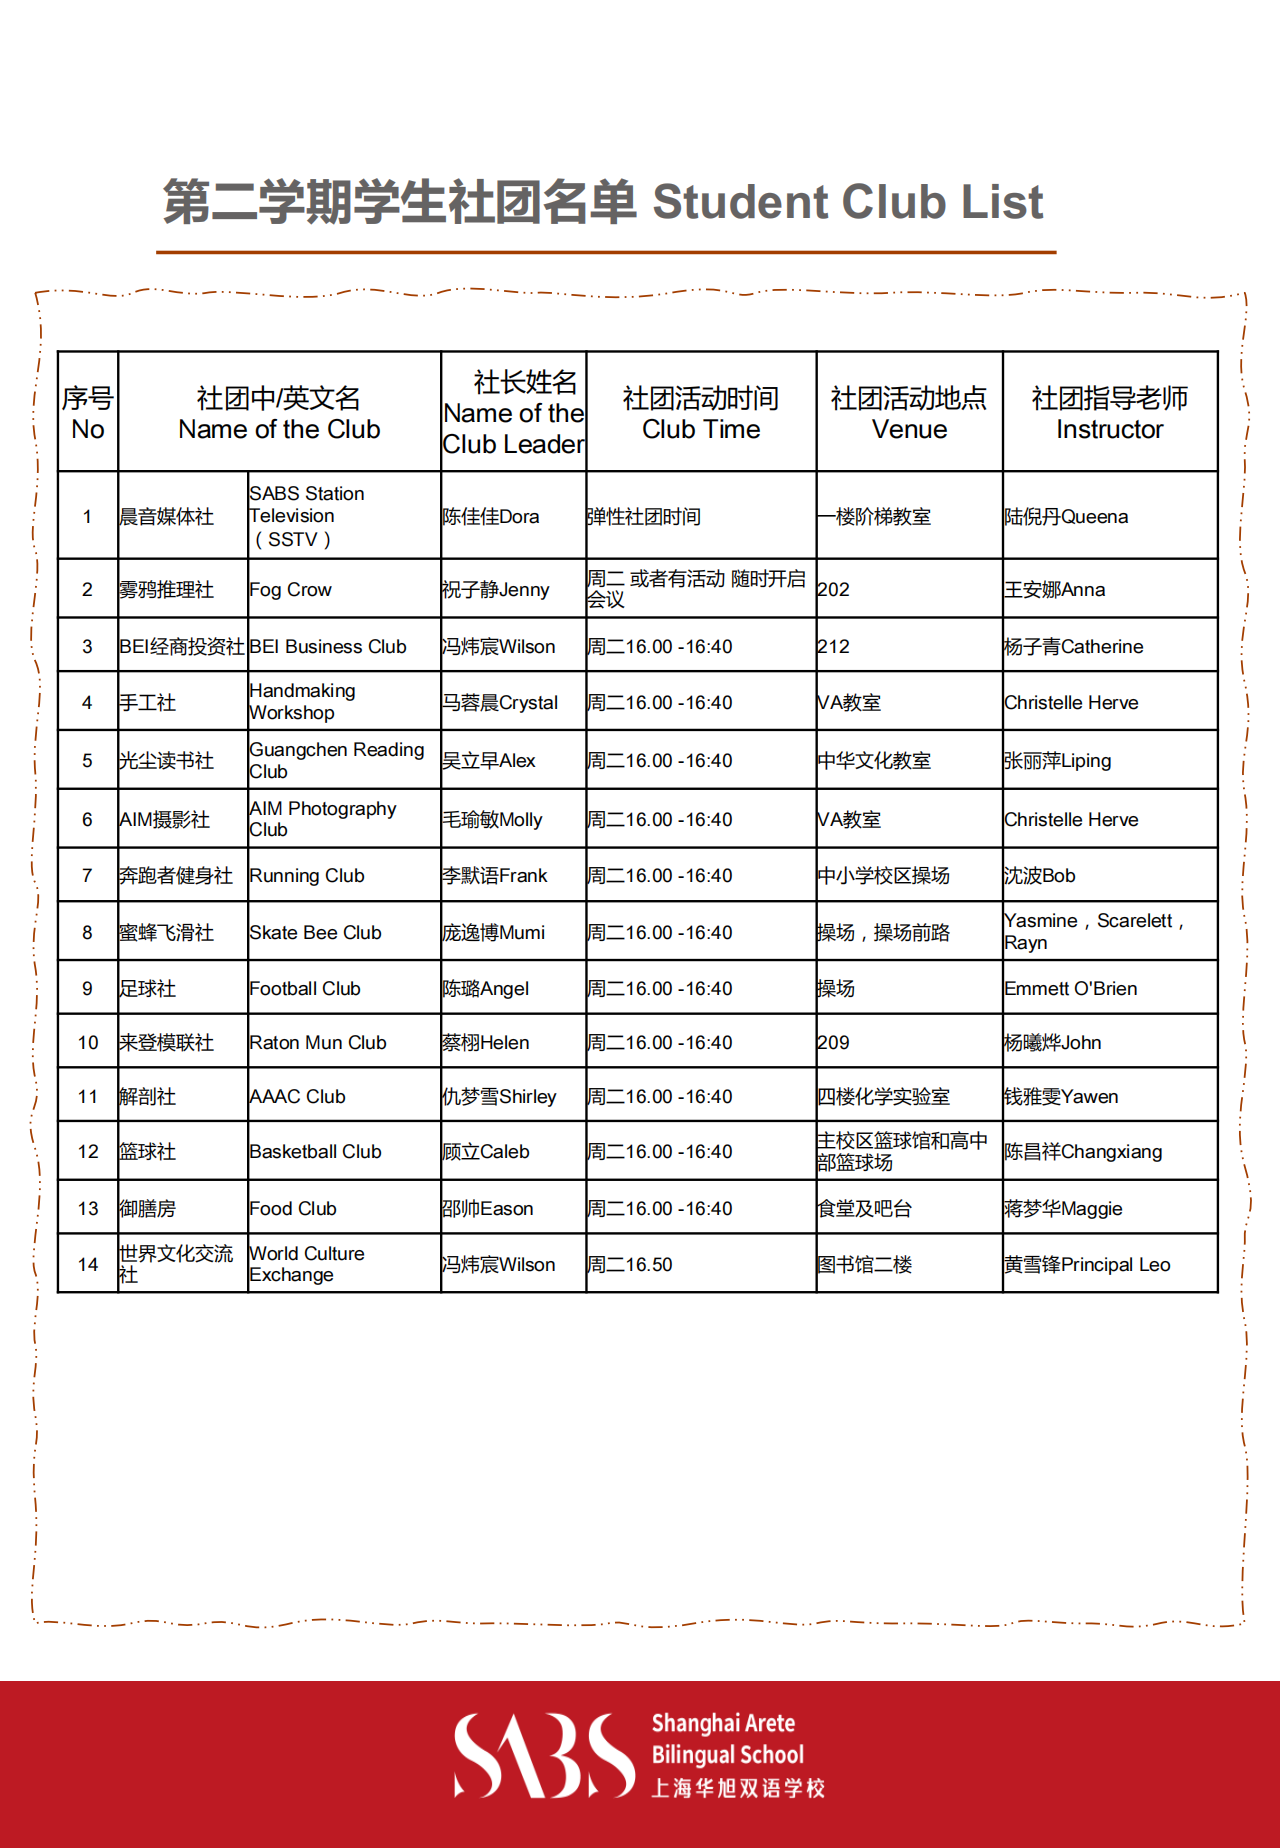 HS 1st Issue Newsletter- Chinese Version_14.png